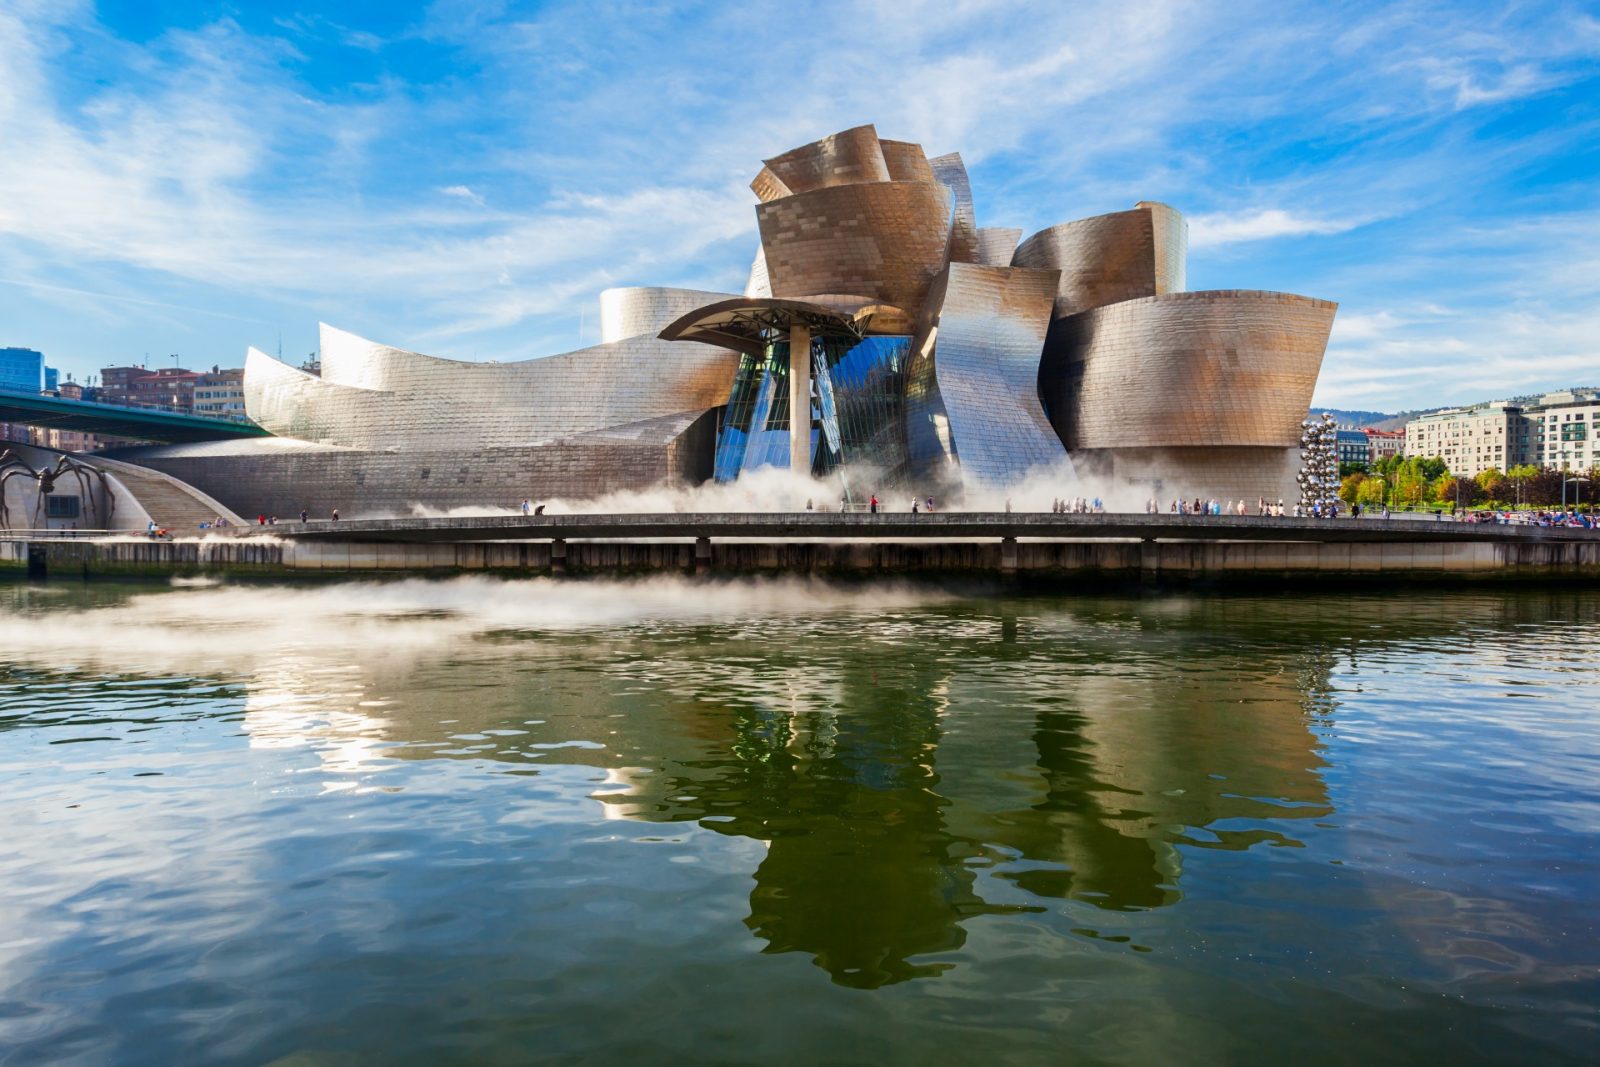 Can You Pass This 40-Question Geography Test That Gets Progressively Harder With Each Question? Guggenheim Museum Bilbao, Spain